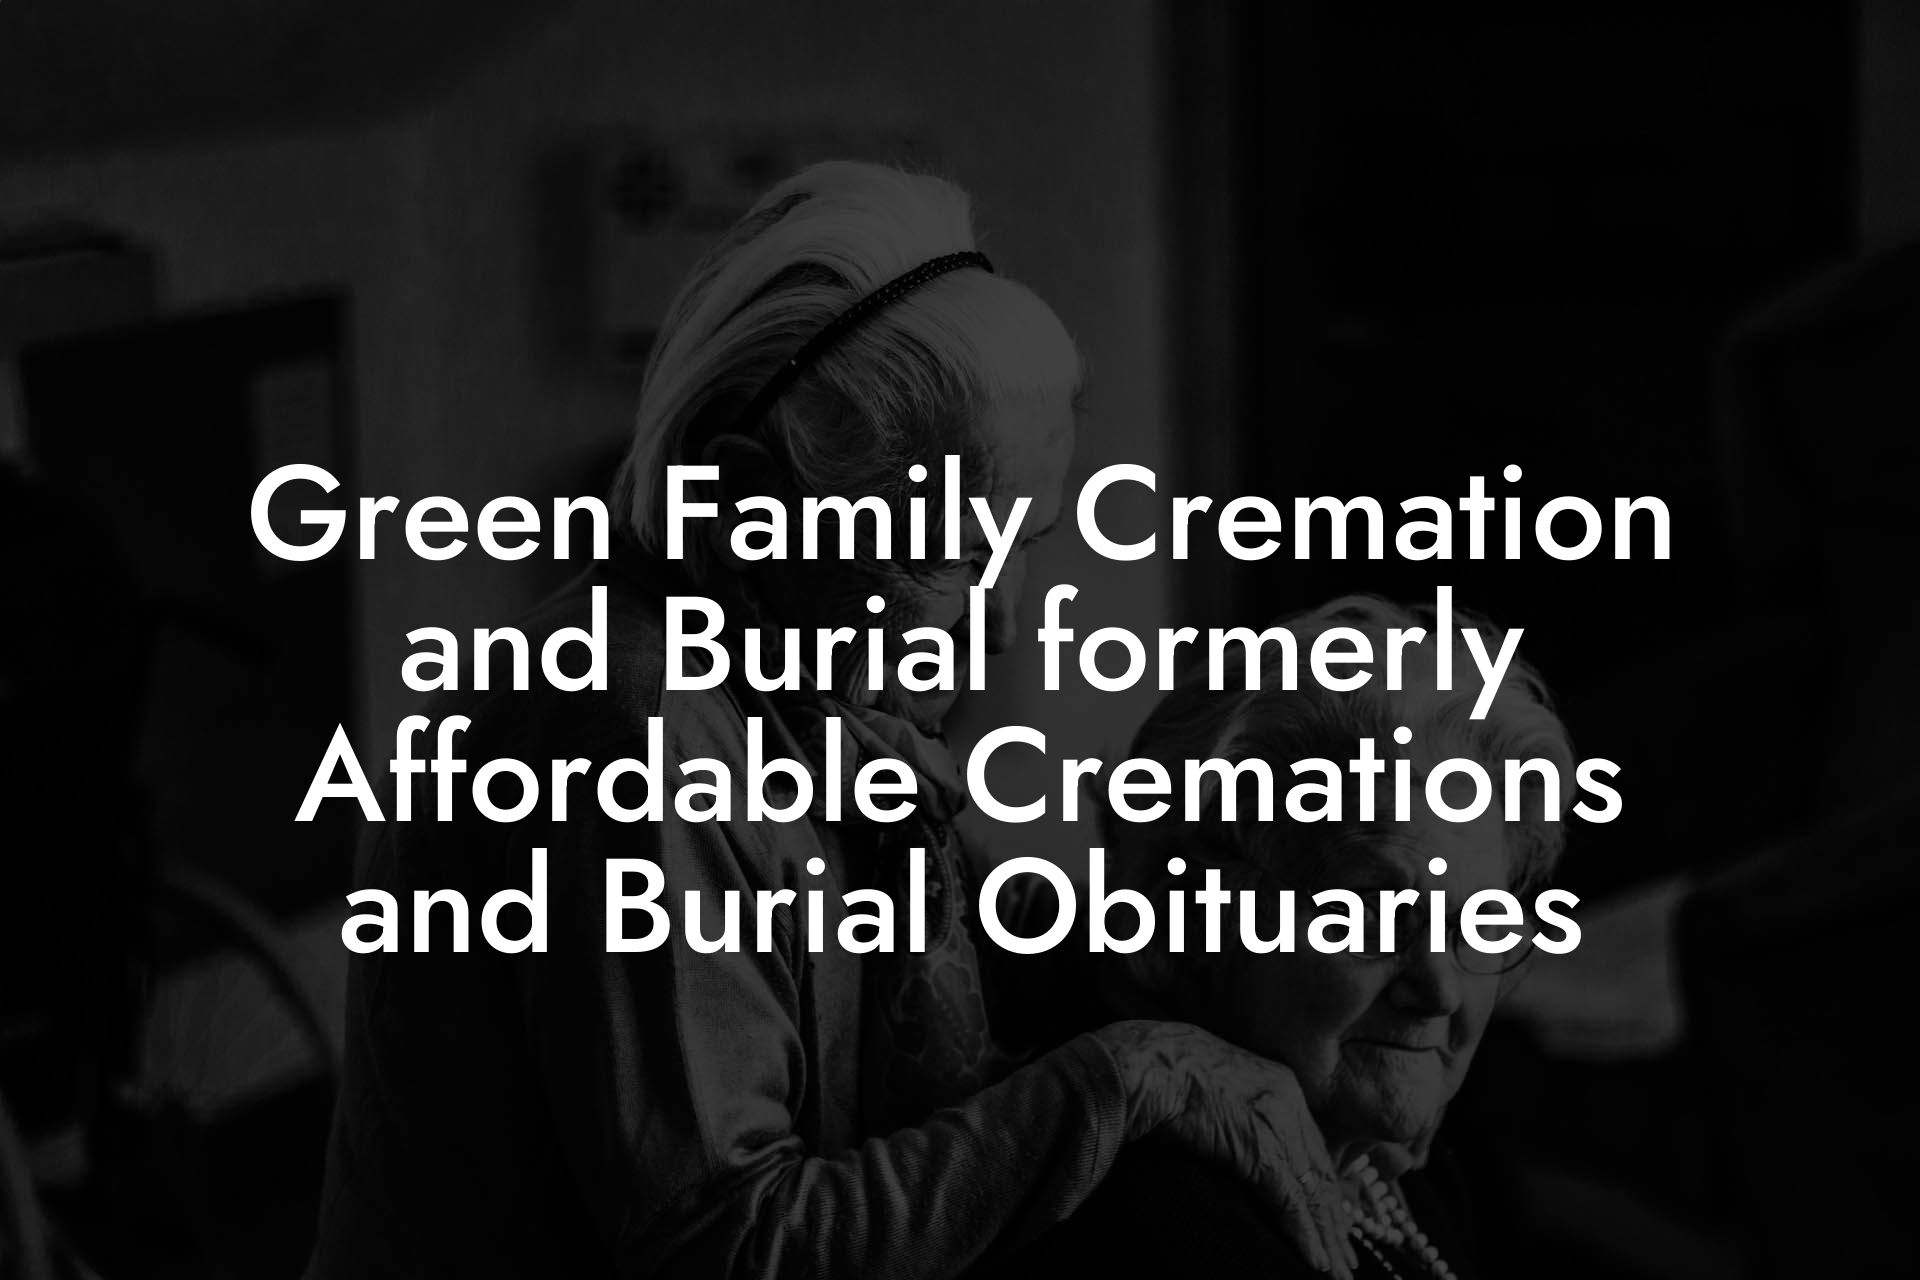 Green Family Cremation and Burial formerly Affordable Cremations and Burial Obituaries